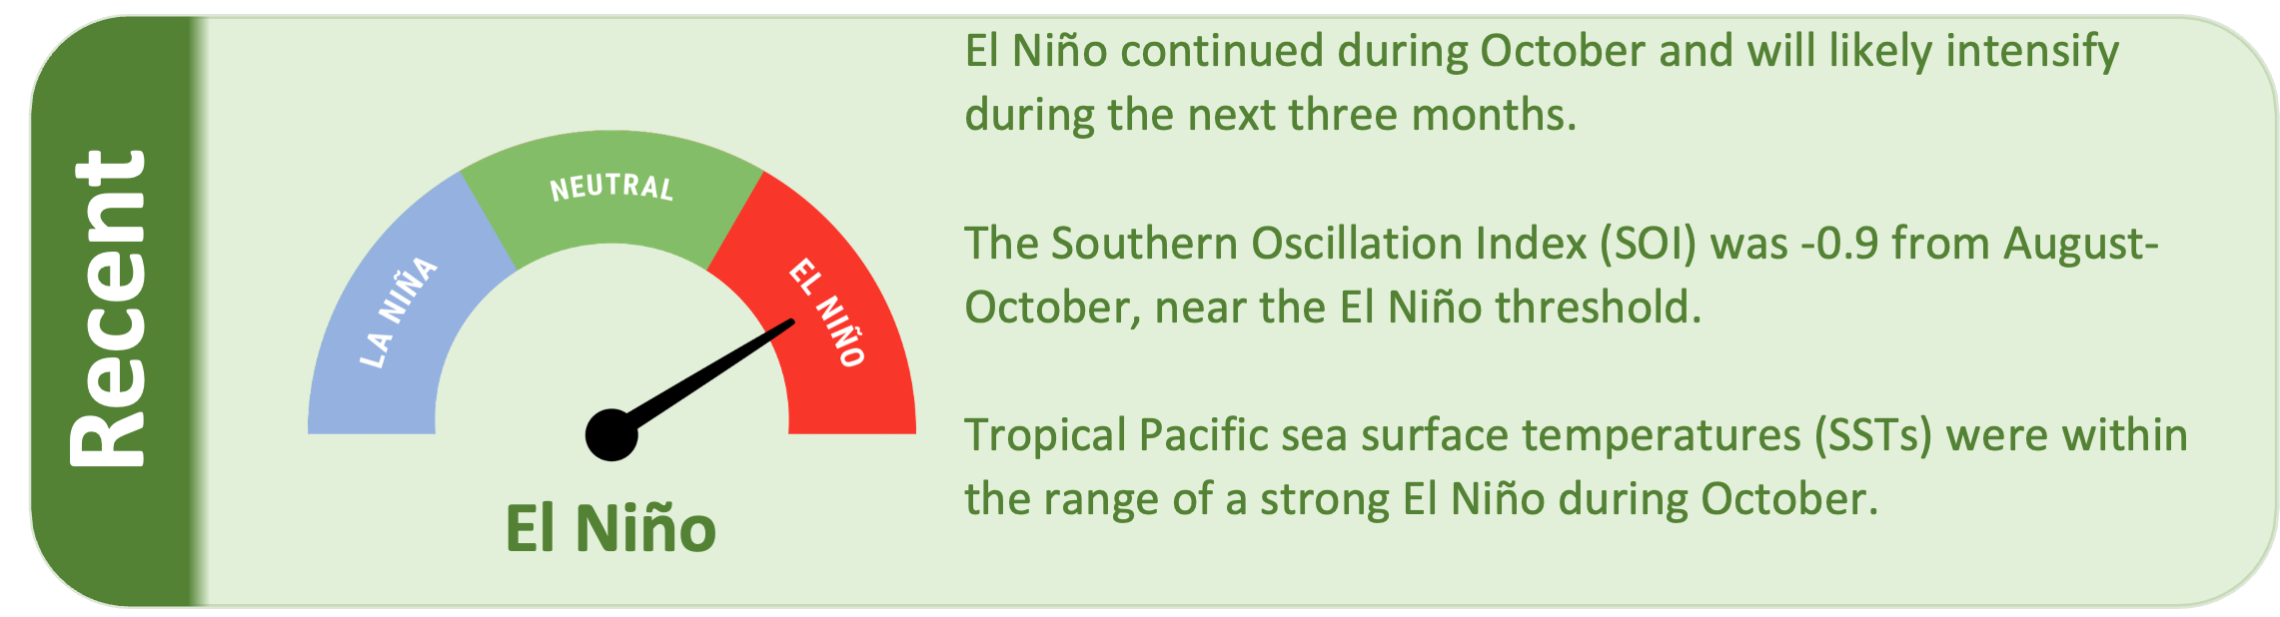 Recent ICU news - El Niño continued during October and will likely intensify during the next three months